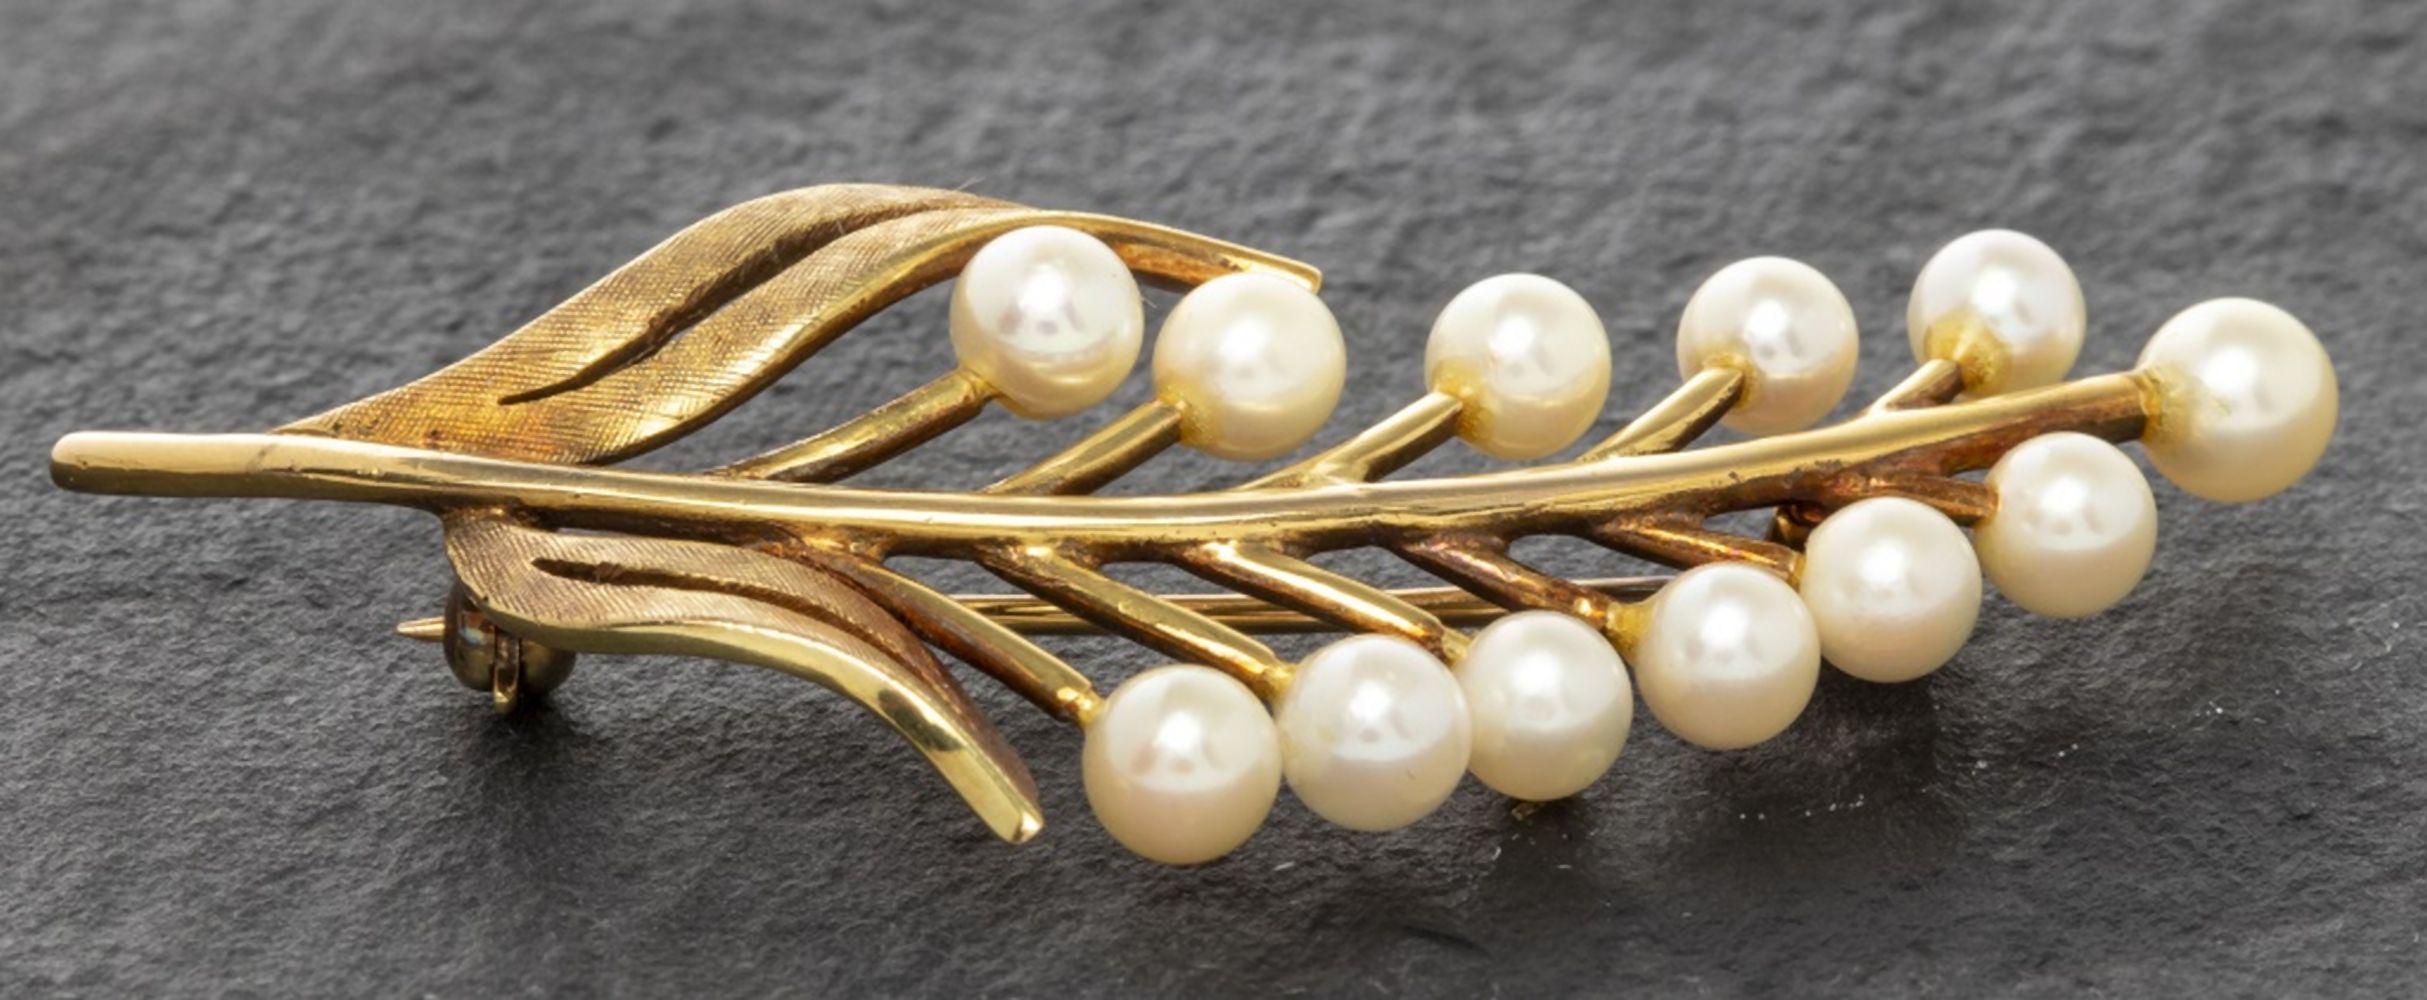 VINTAGE 14K YELLOW GOLD PEARL BROOCH 3ce951